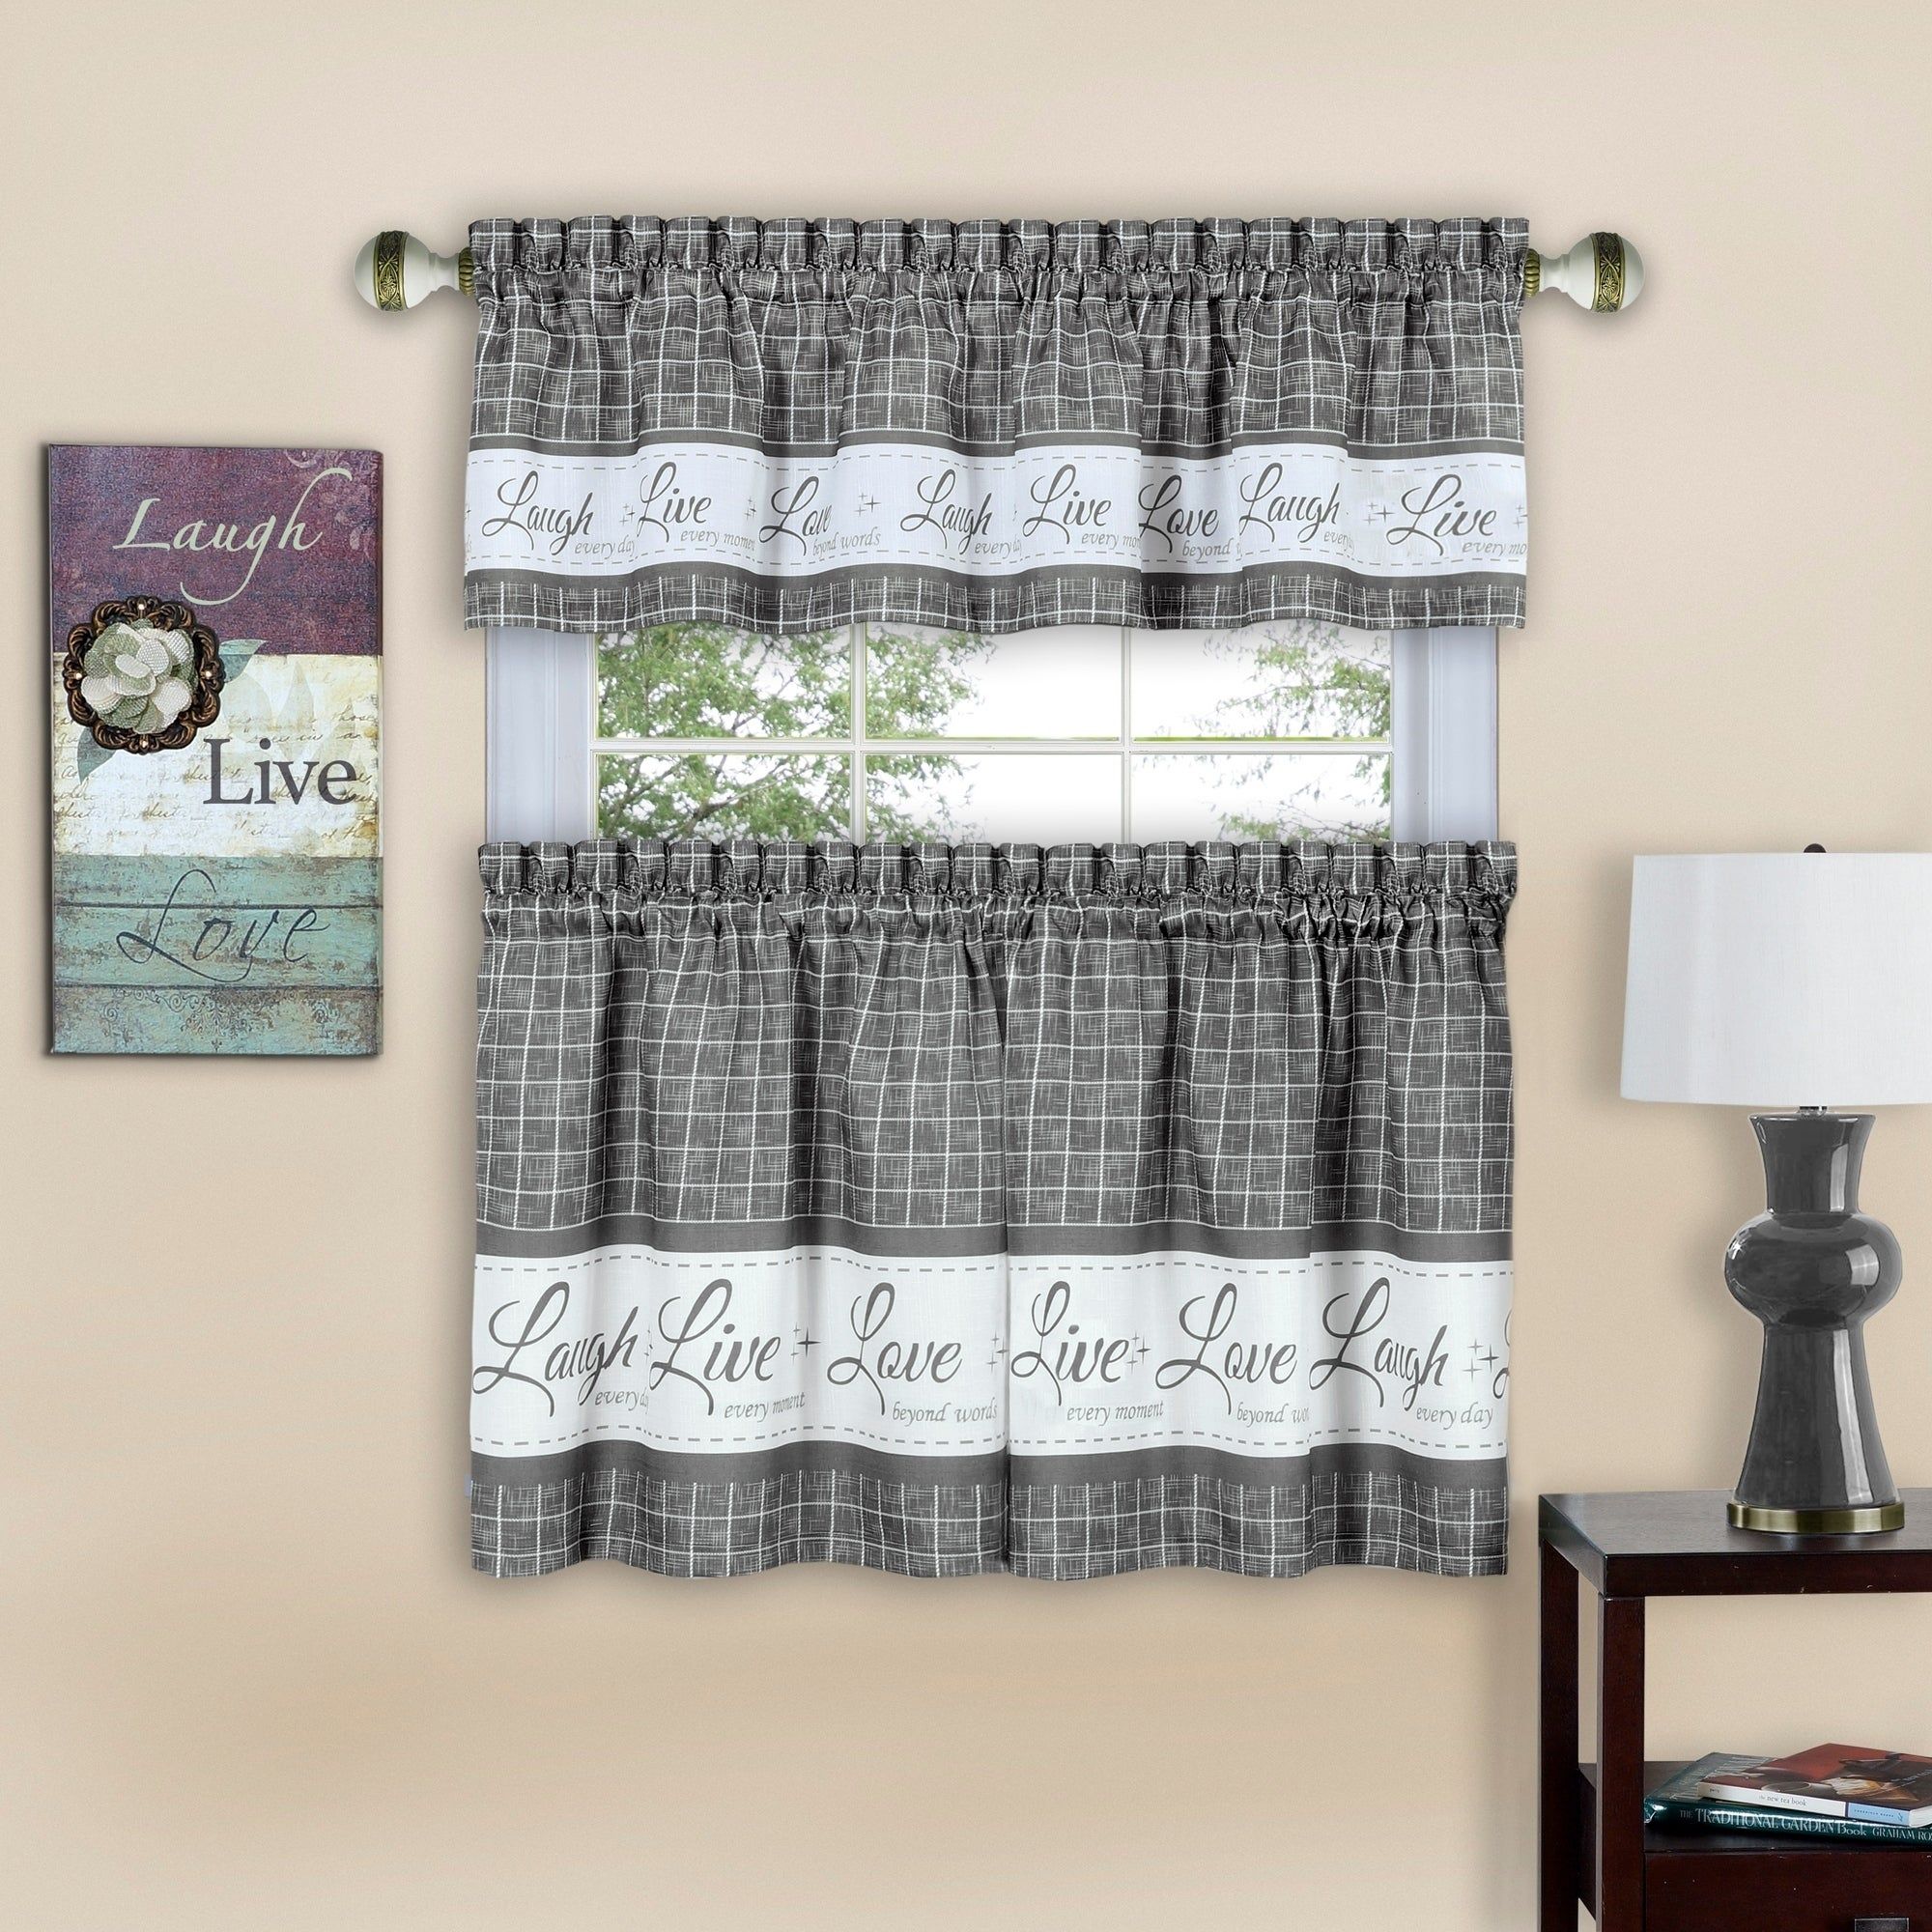 Live, Love, Laugh Window Curtain Tier Pair And Valance Set With Regard To Barnyard Window Curtain Tier Pair And Valance Sets (View 3 of 20)